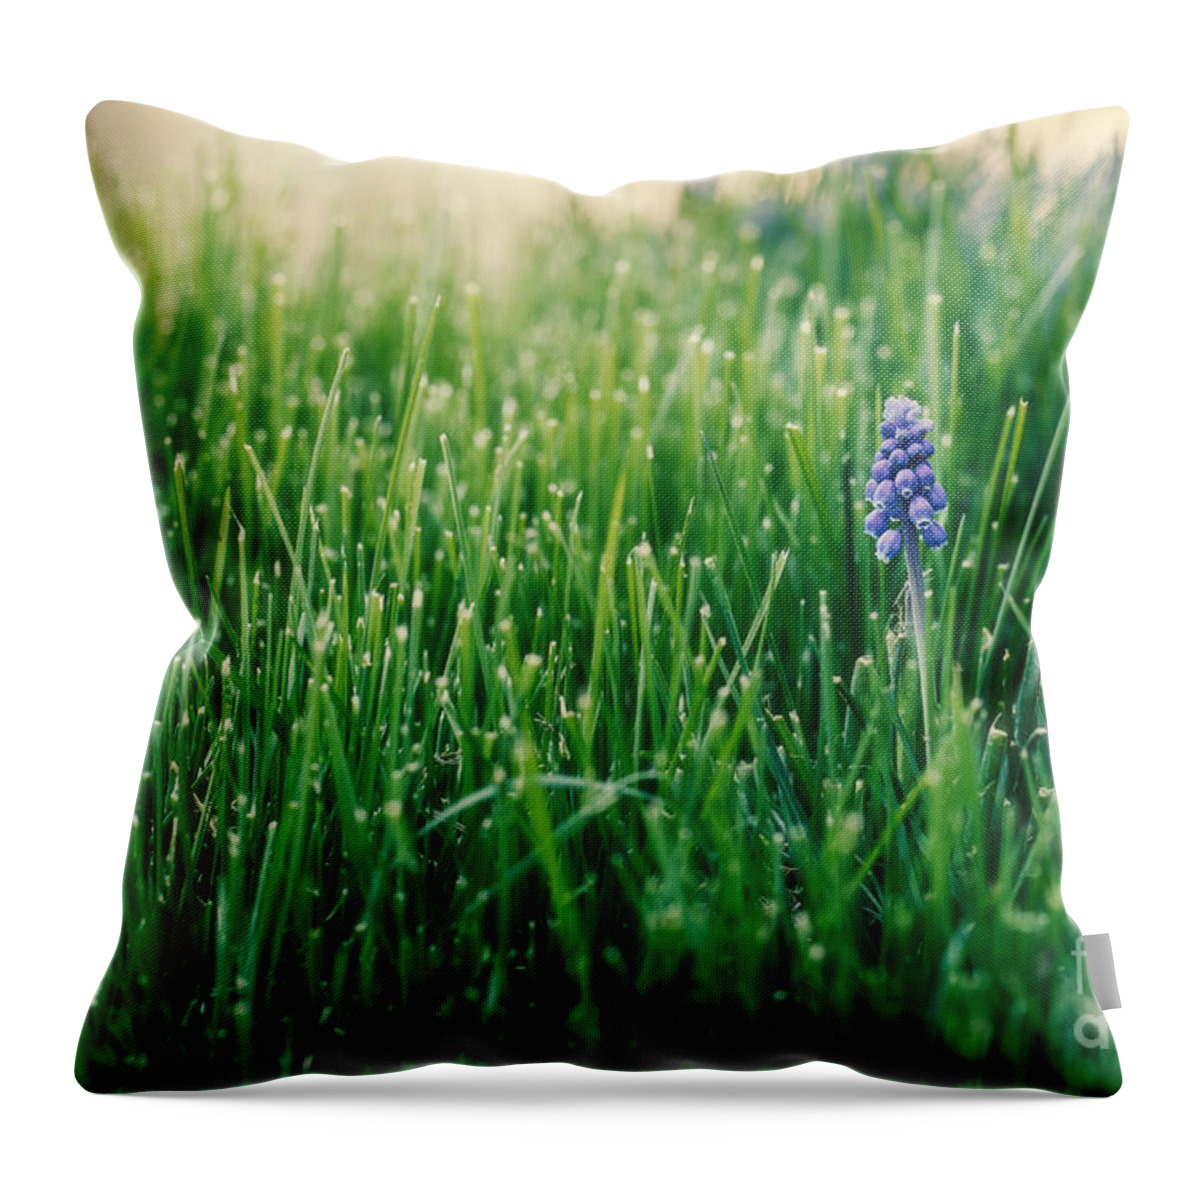 Muscari Throw Pillow featuring the photograph Muscari Or Grape Hyacinth by Mary Smyth